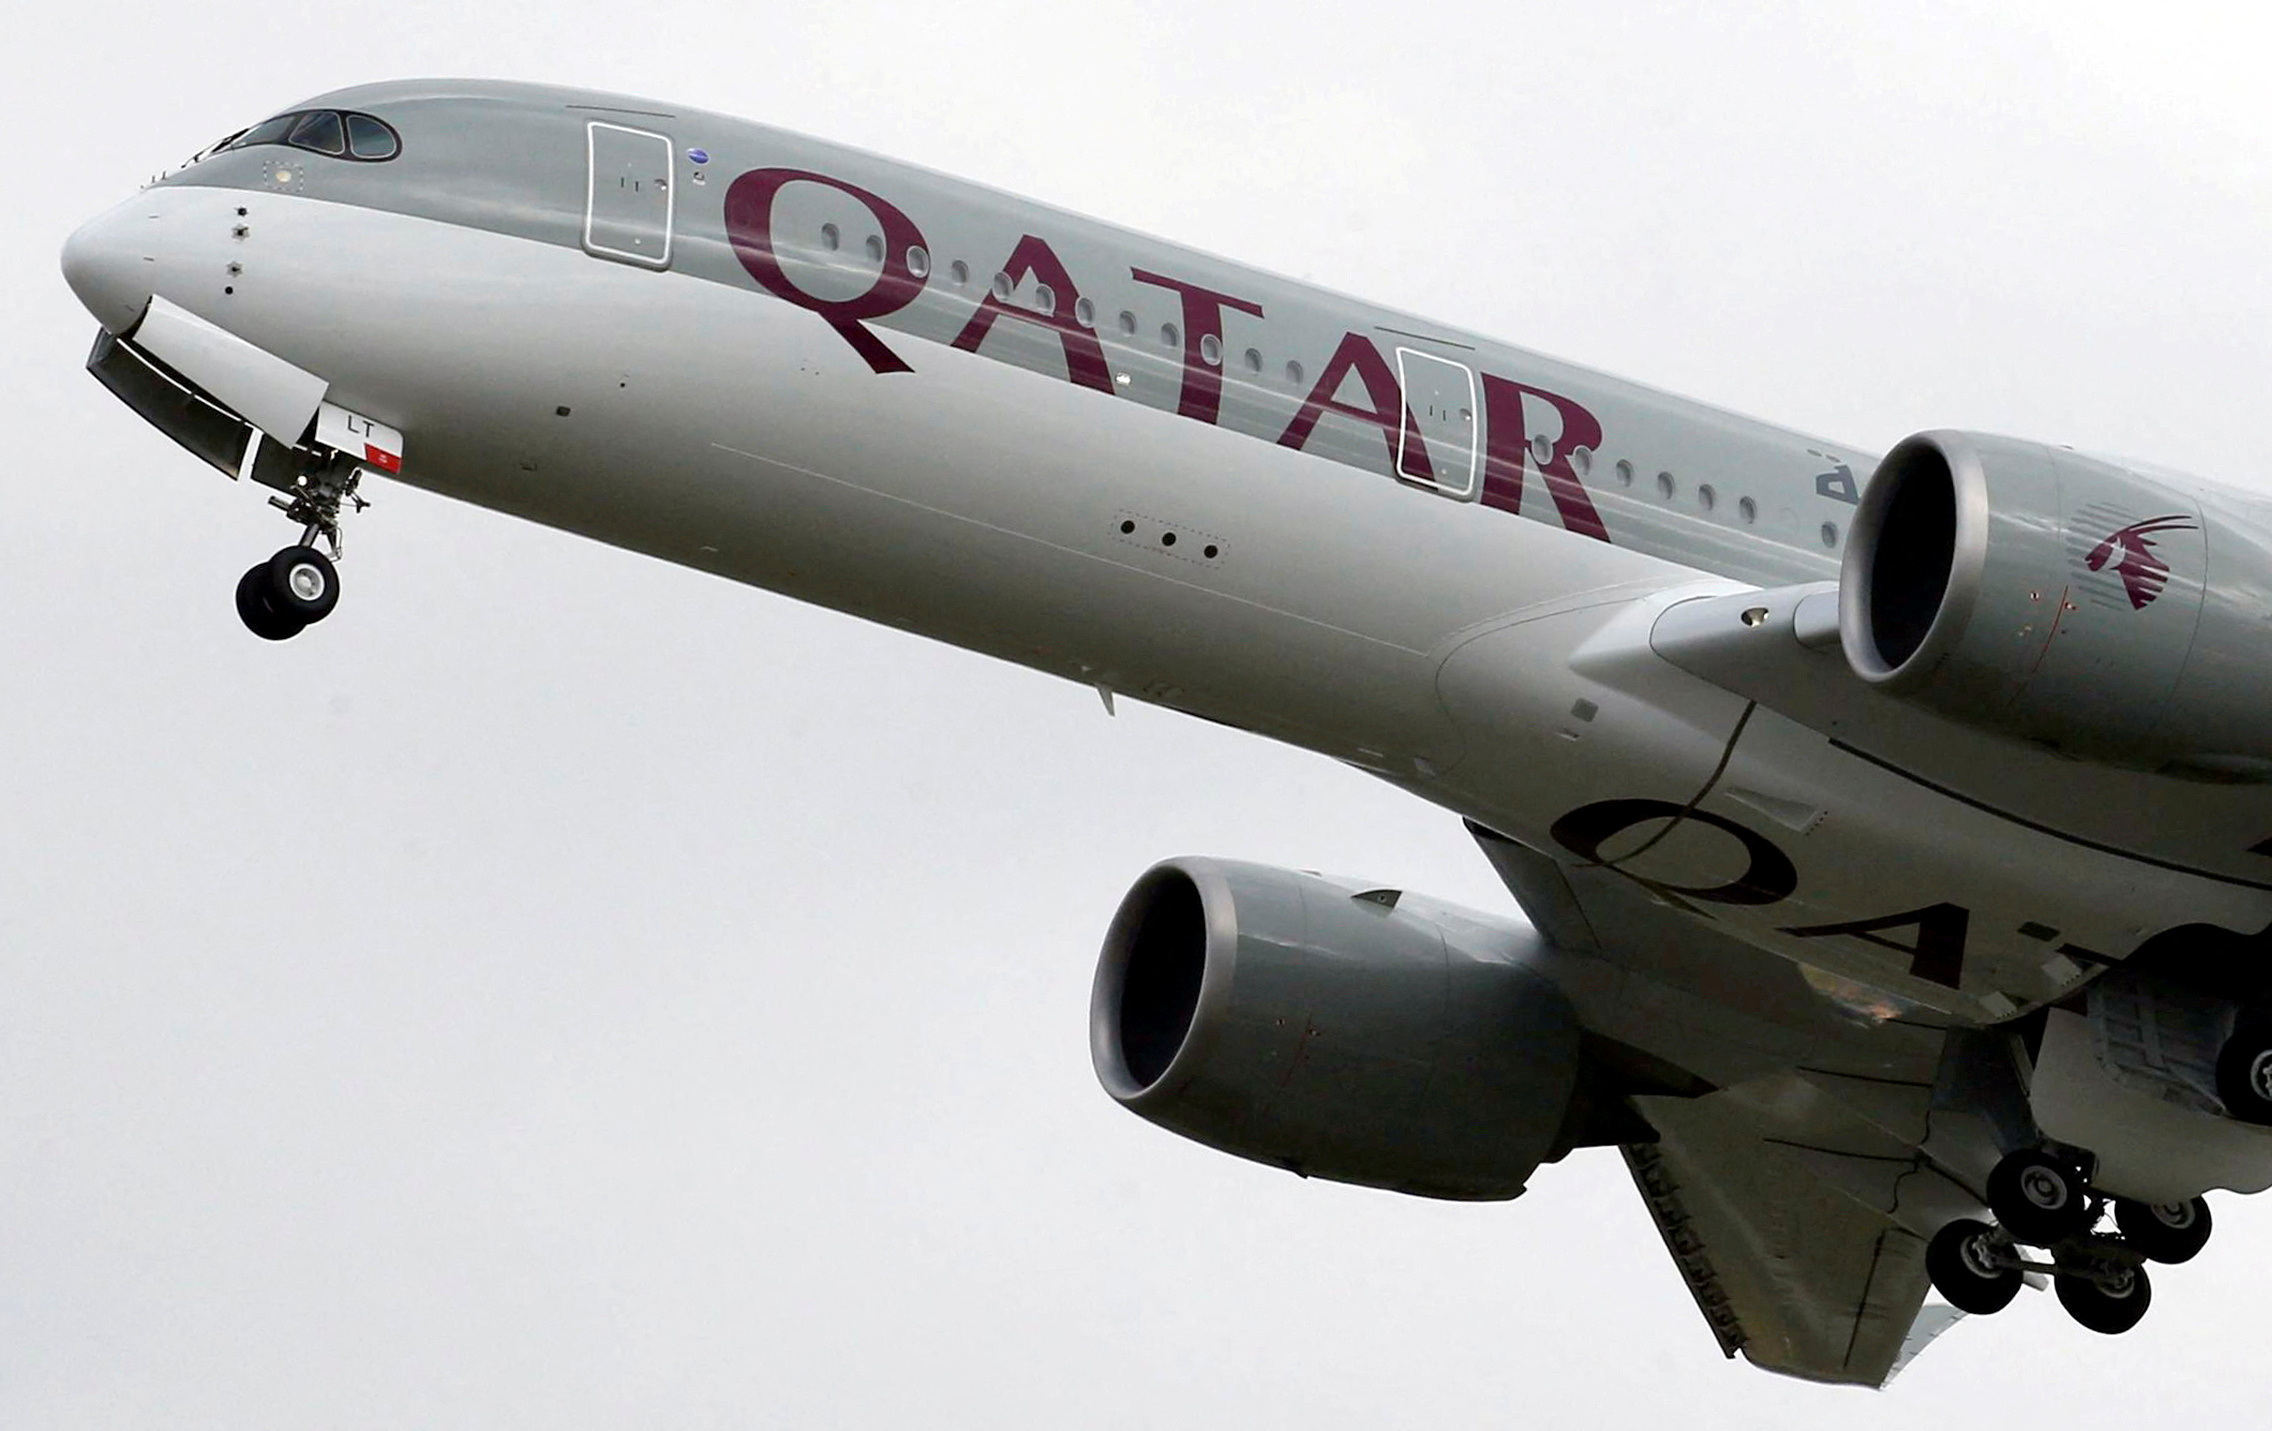 A Qatar Airways Airbus A350 aircraft takes off in Colomiers near Toulouse